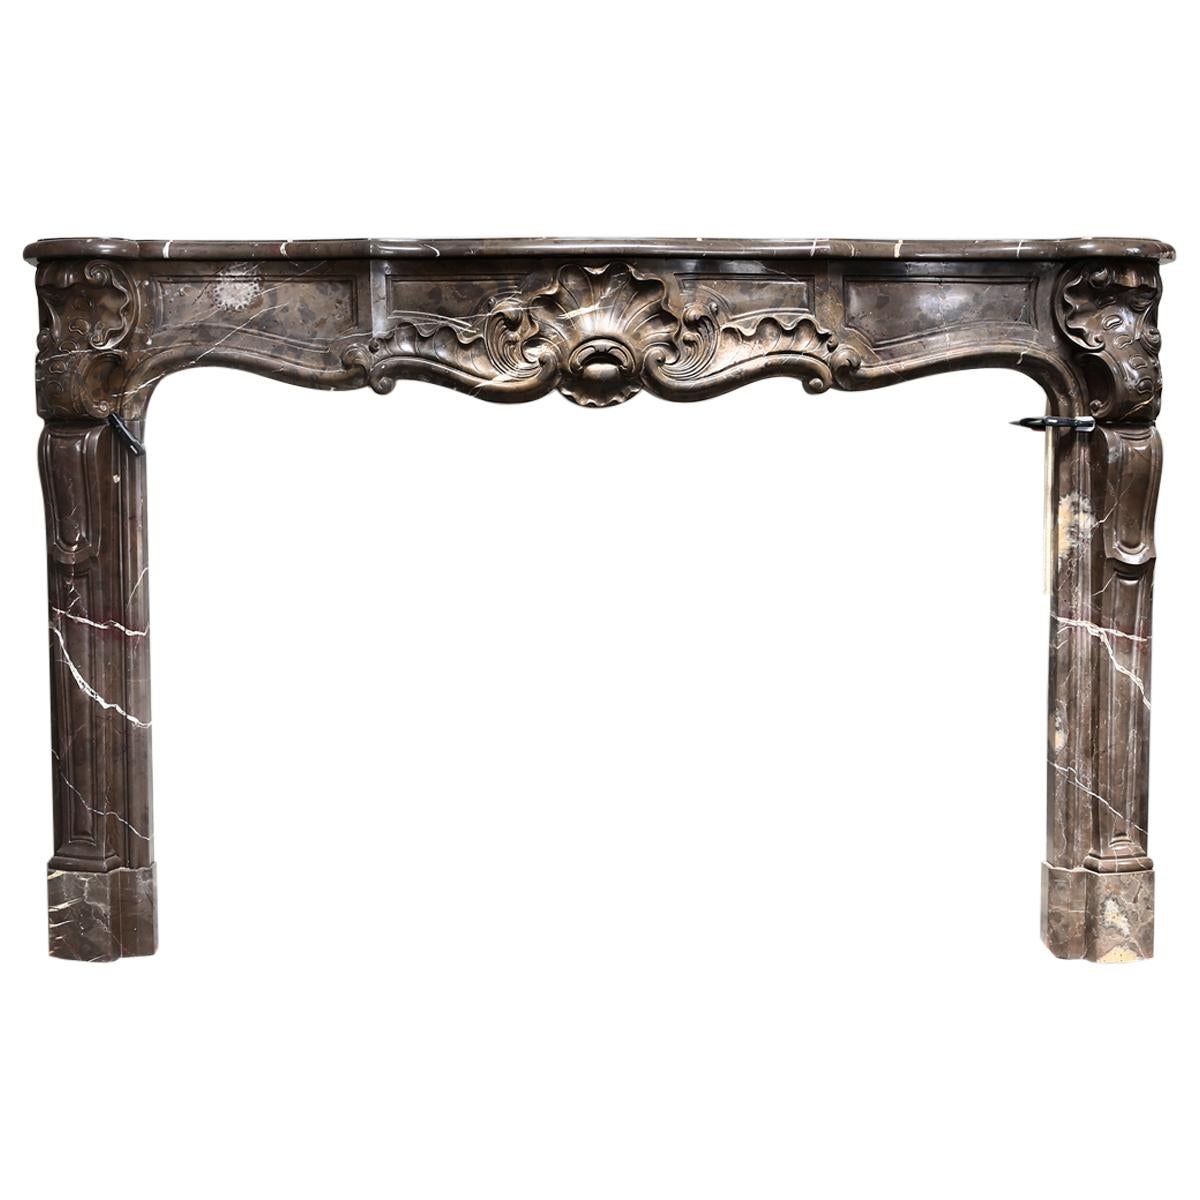 Exclusive Mantel of Marbre de Boulogne in Style of Louis XV